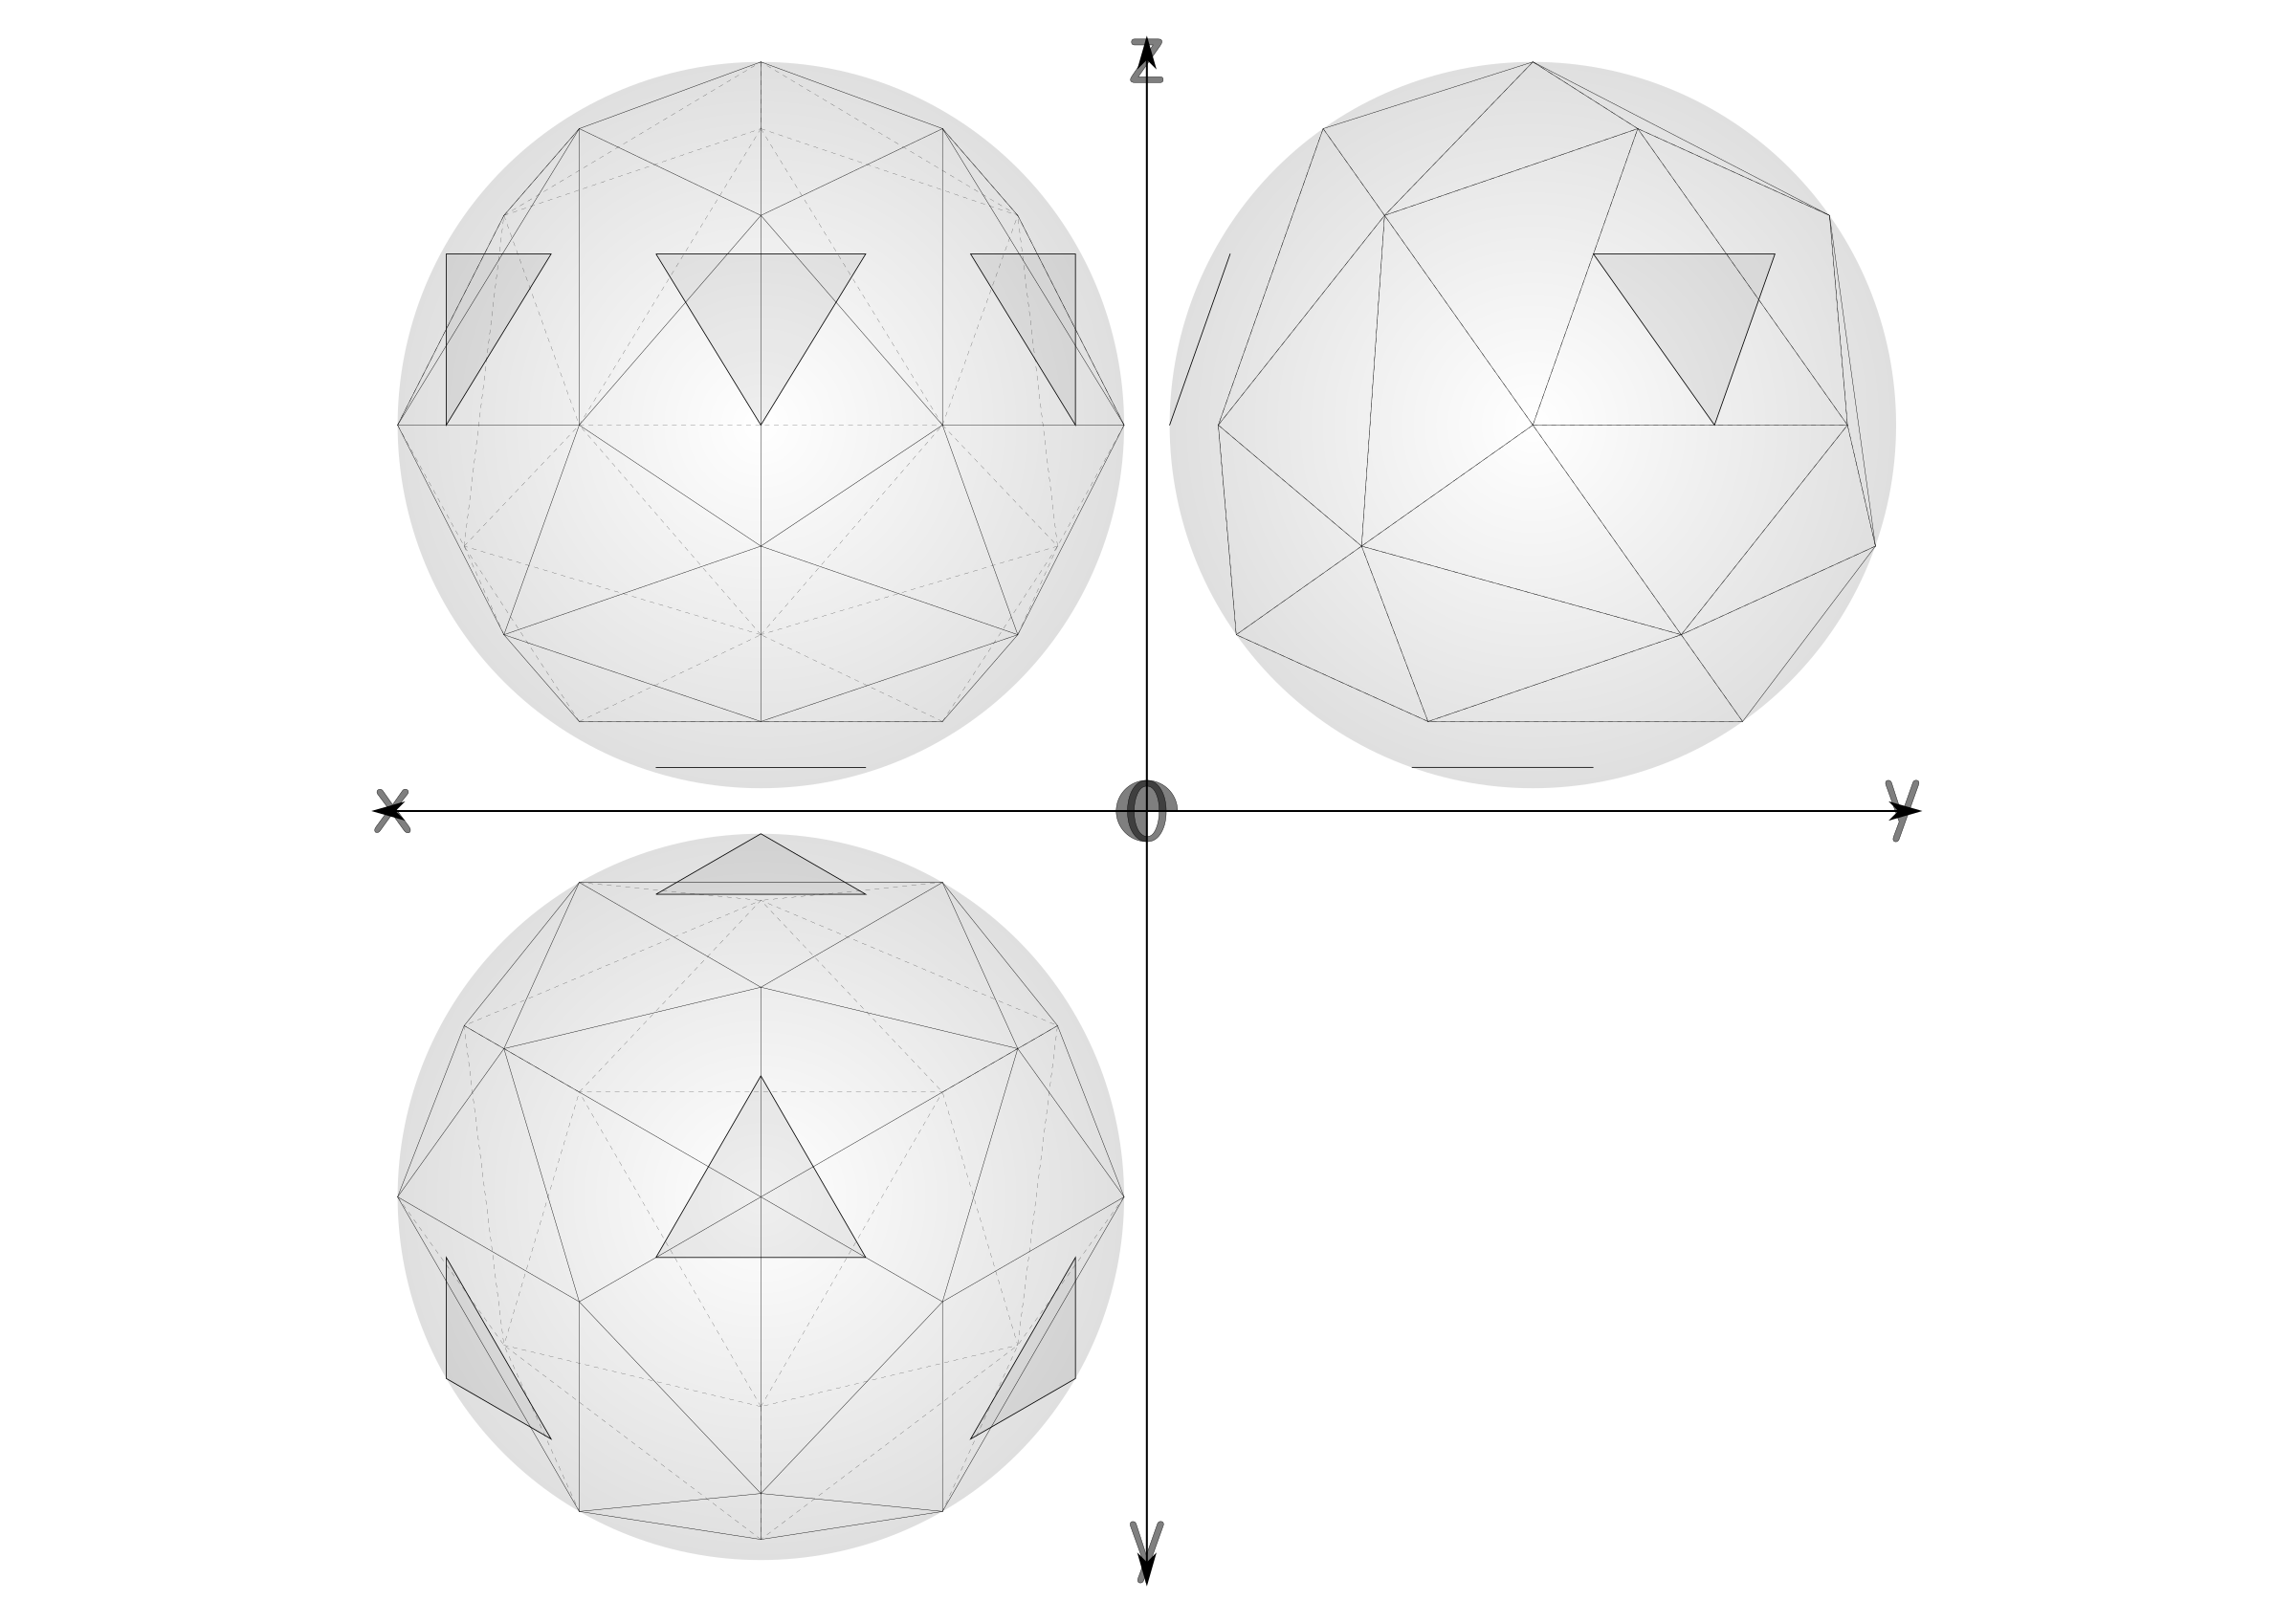 40 construction geodesic spheres recursive from tetrahedron SVG Clip arts